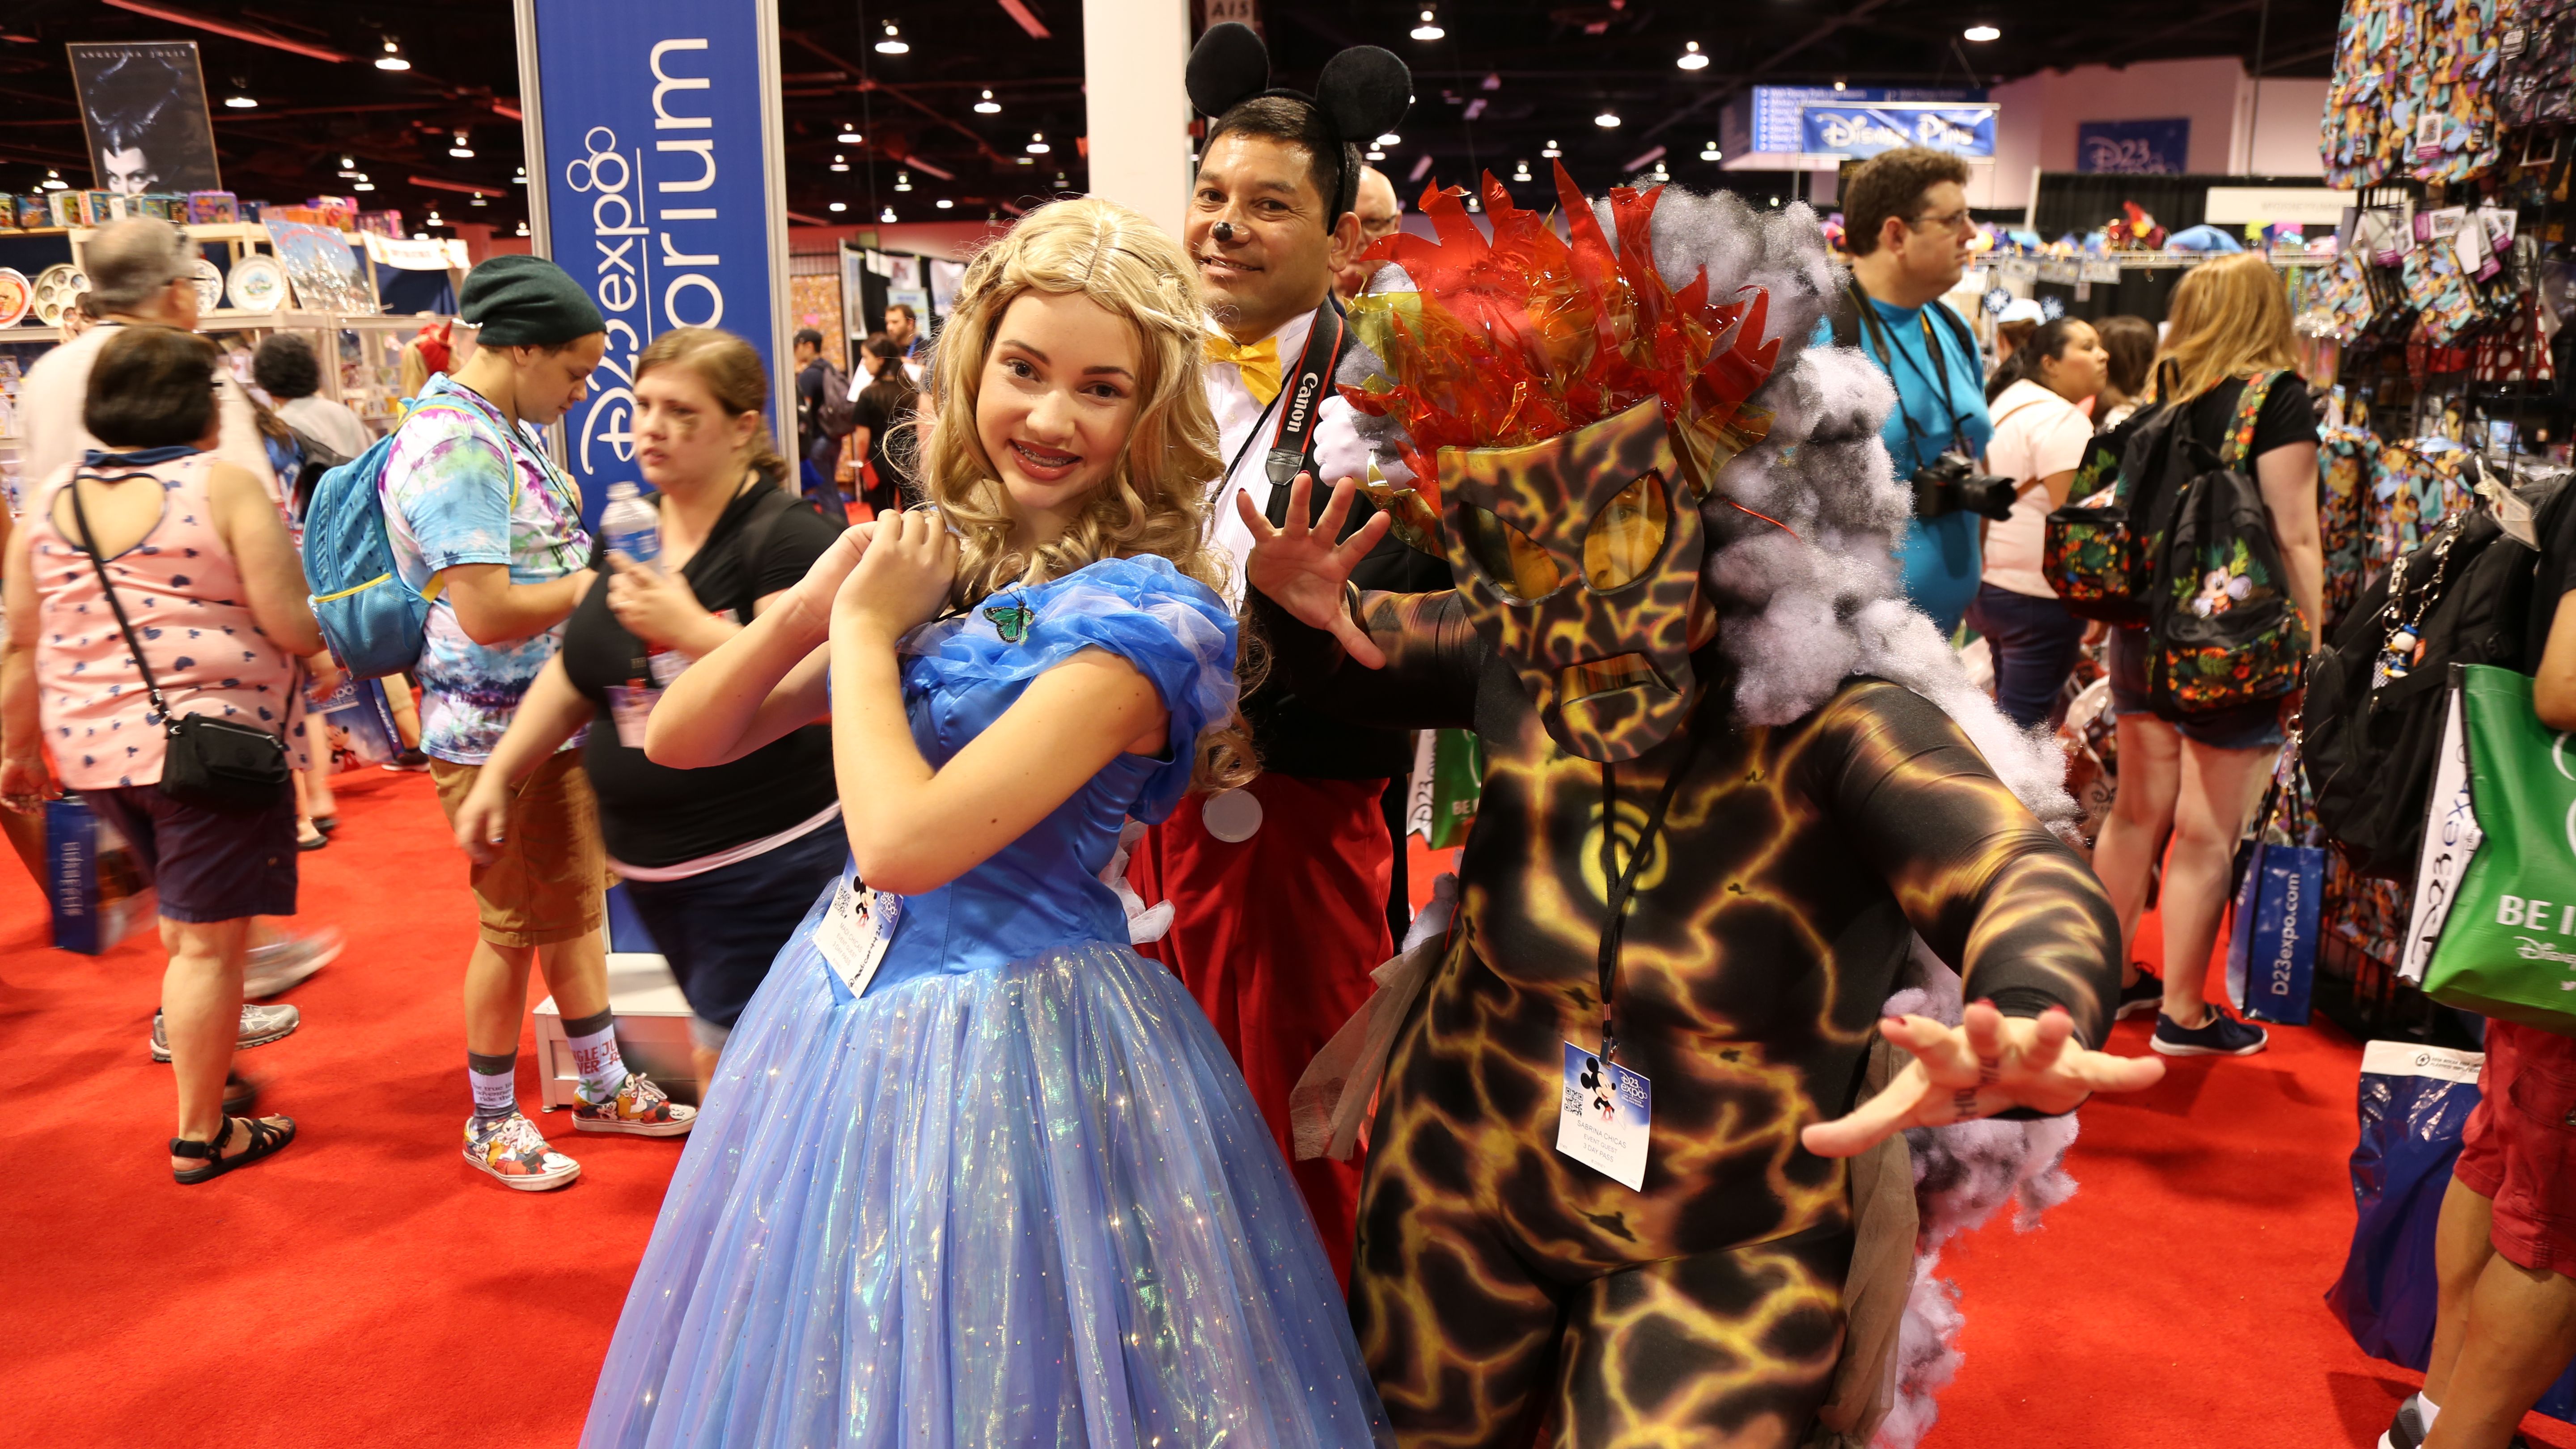 D23: Over 50 Convention Floor Images Reveal Disney Cosplay | Collider5760 x 3240